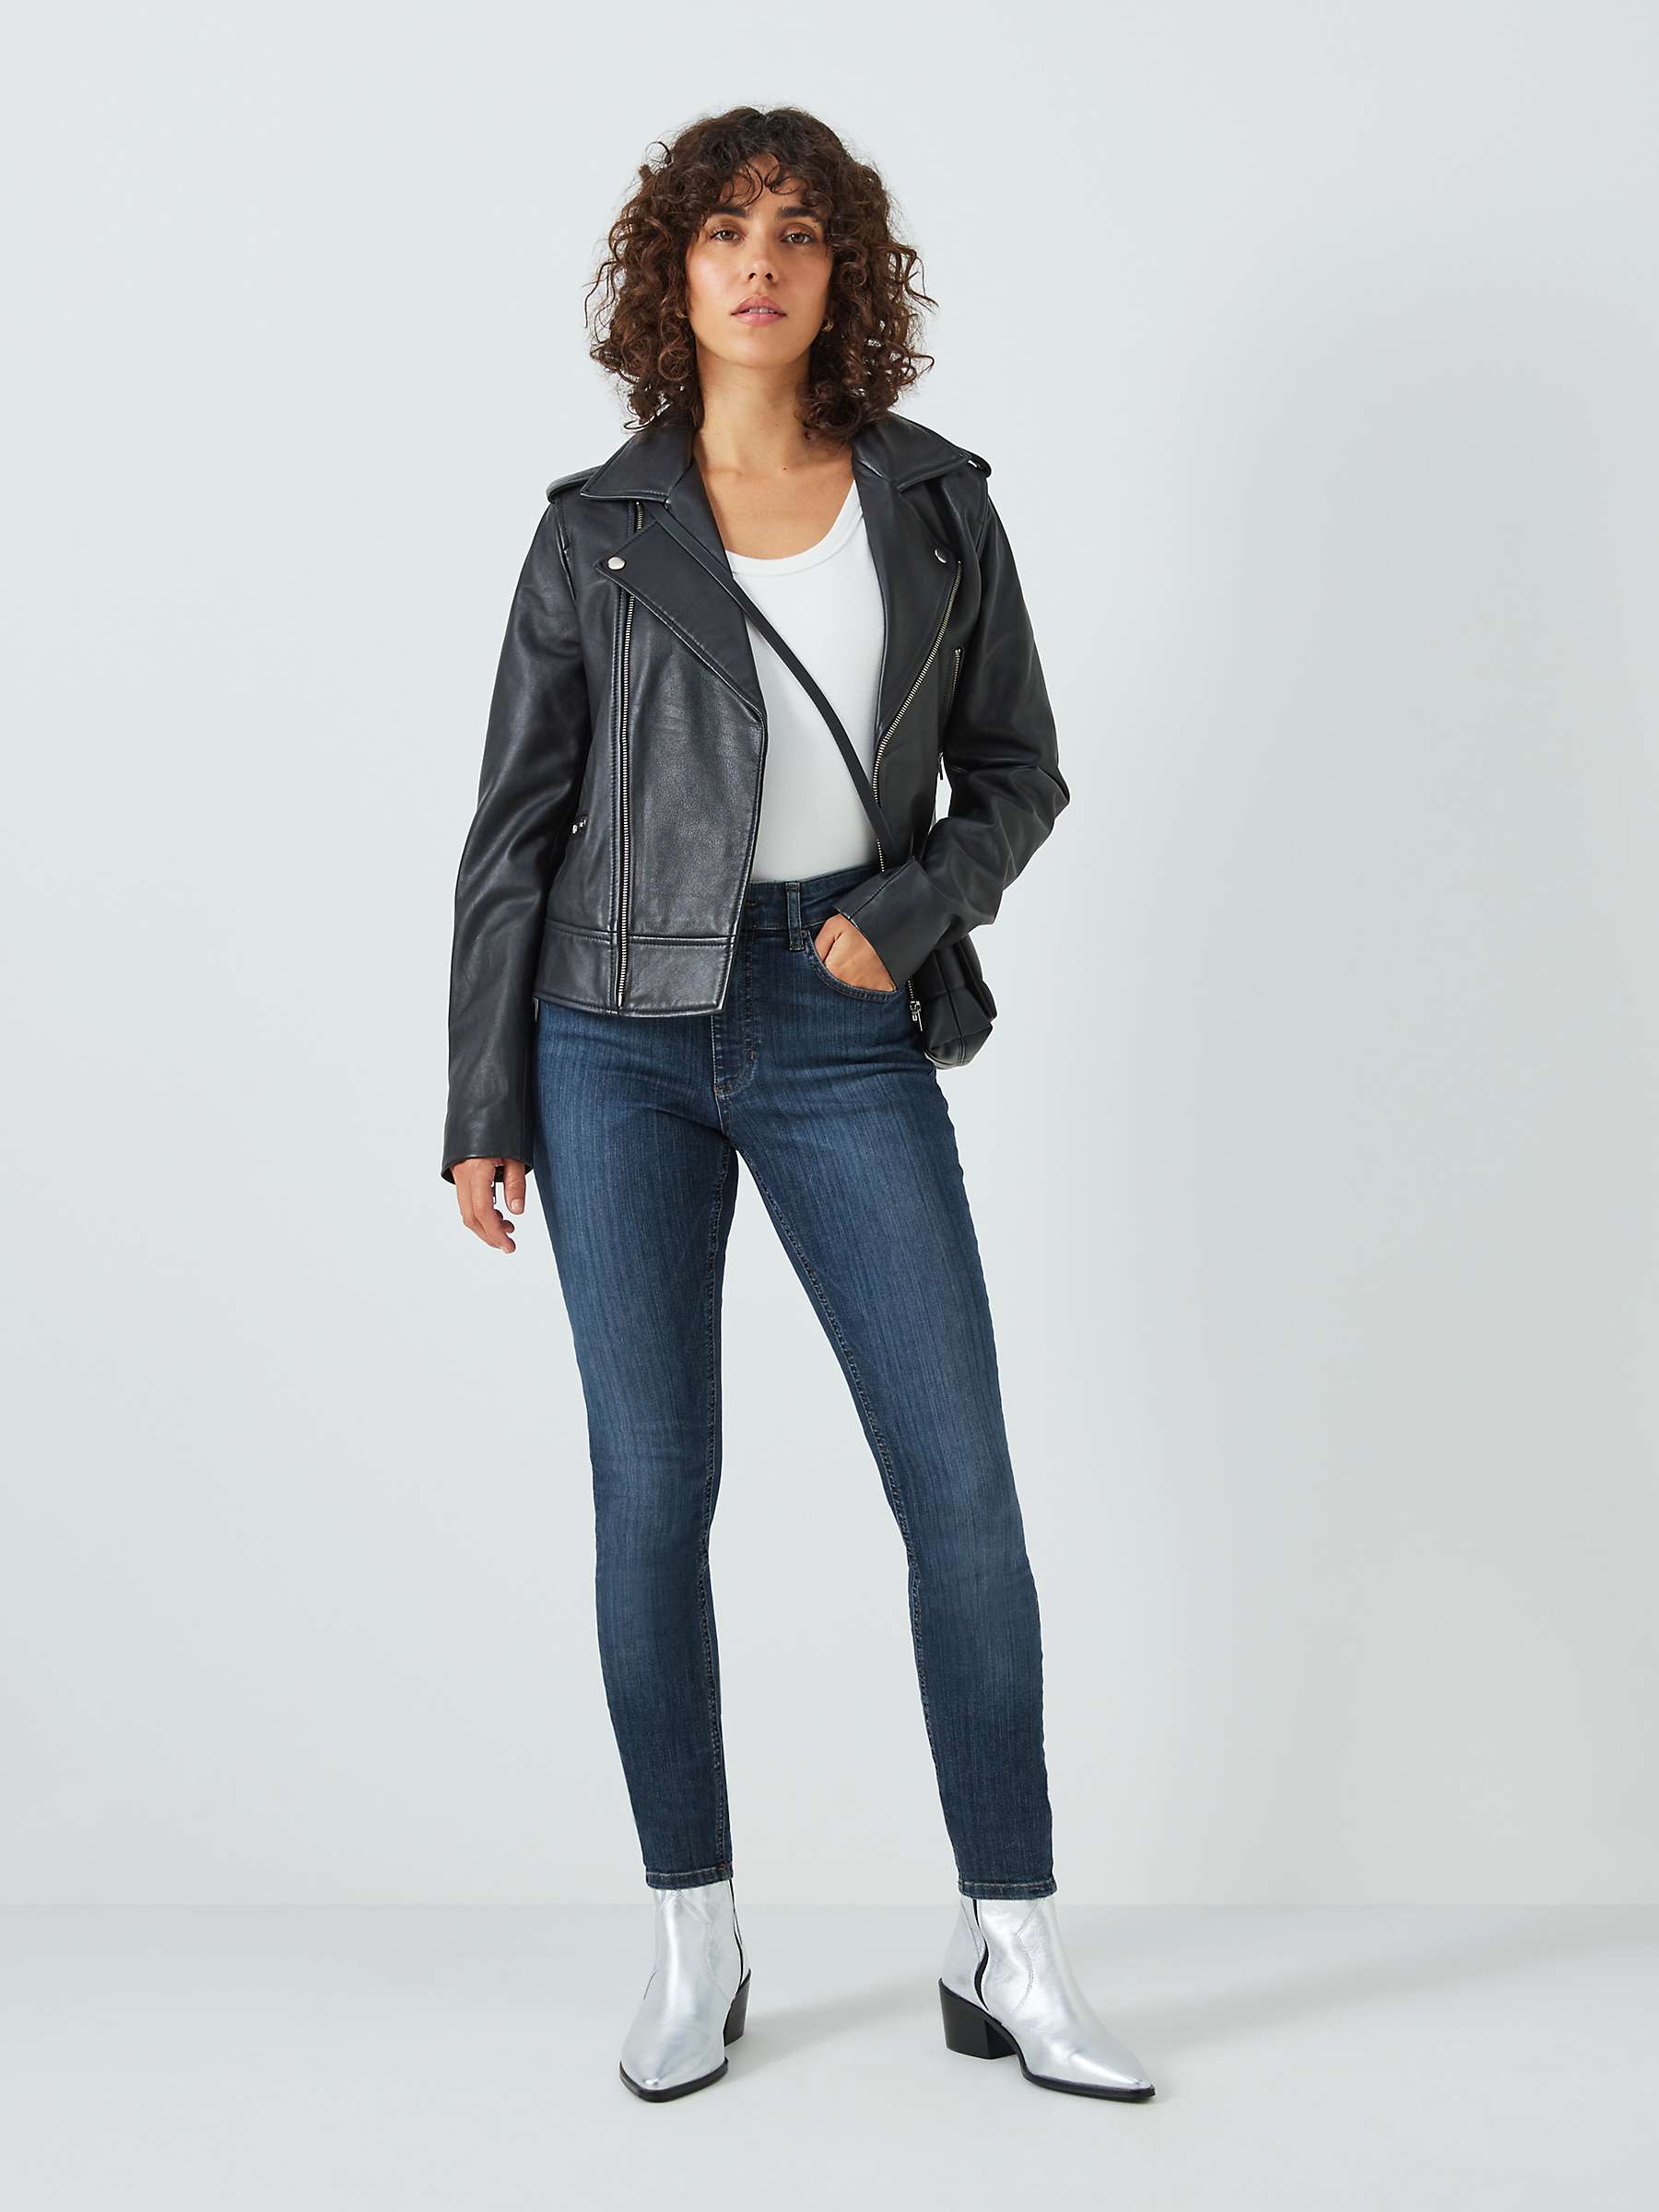 Buy AND/OR Abbott Kinney Skinny Jeans, Vintage Perfected Online at johnlewis.com